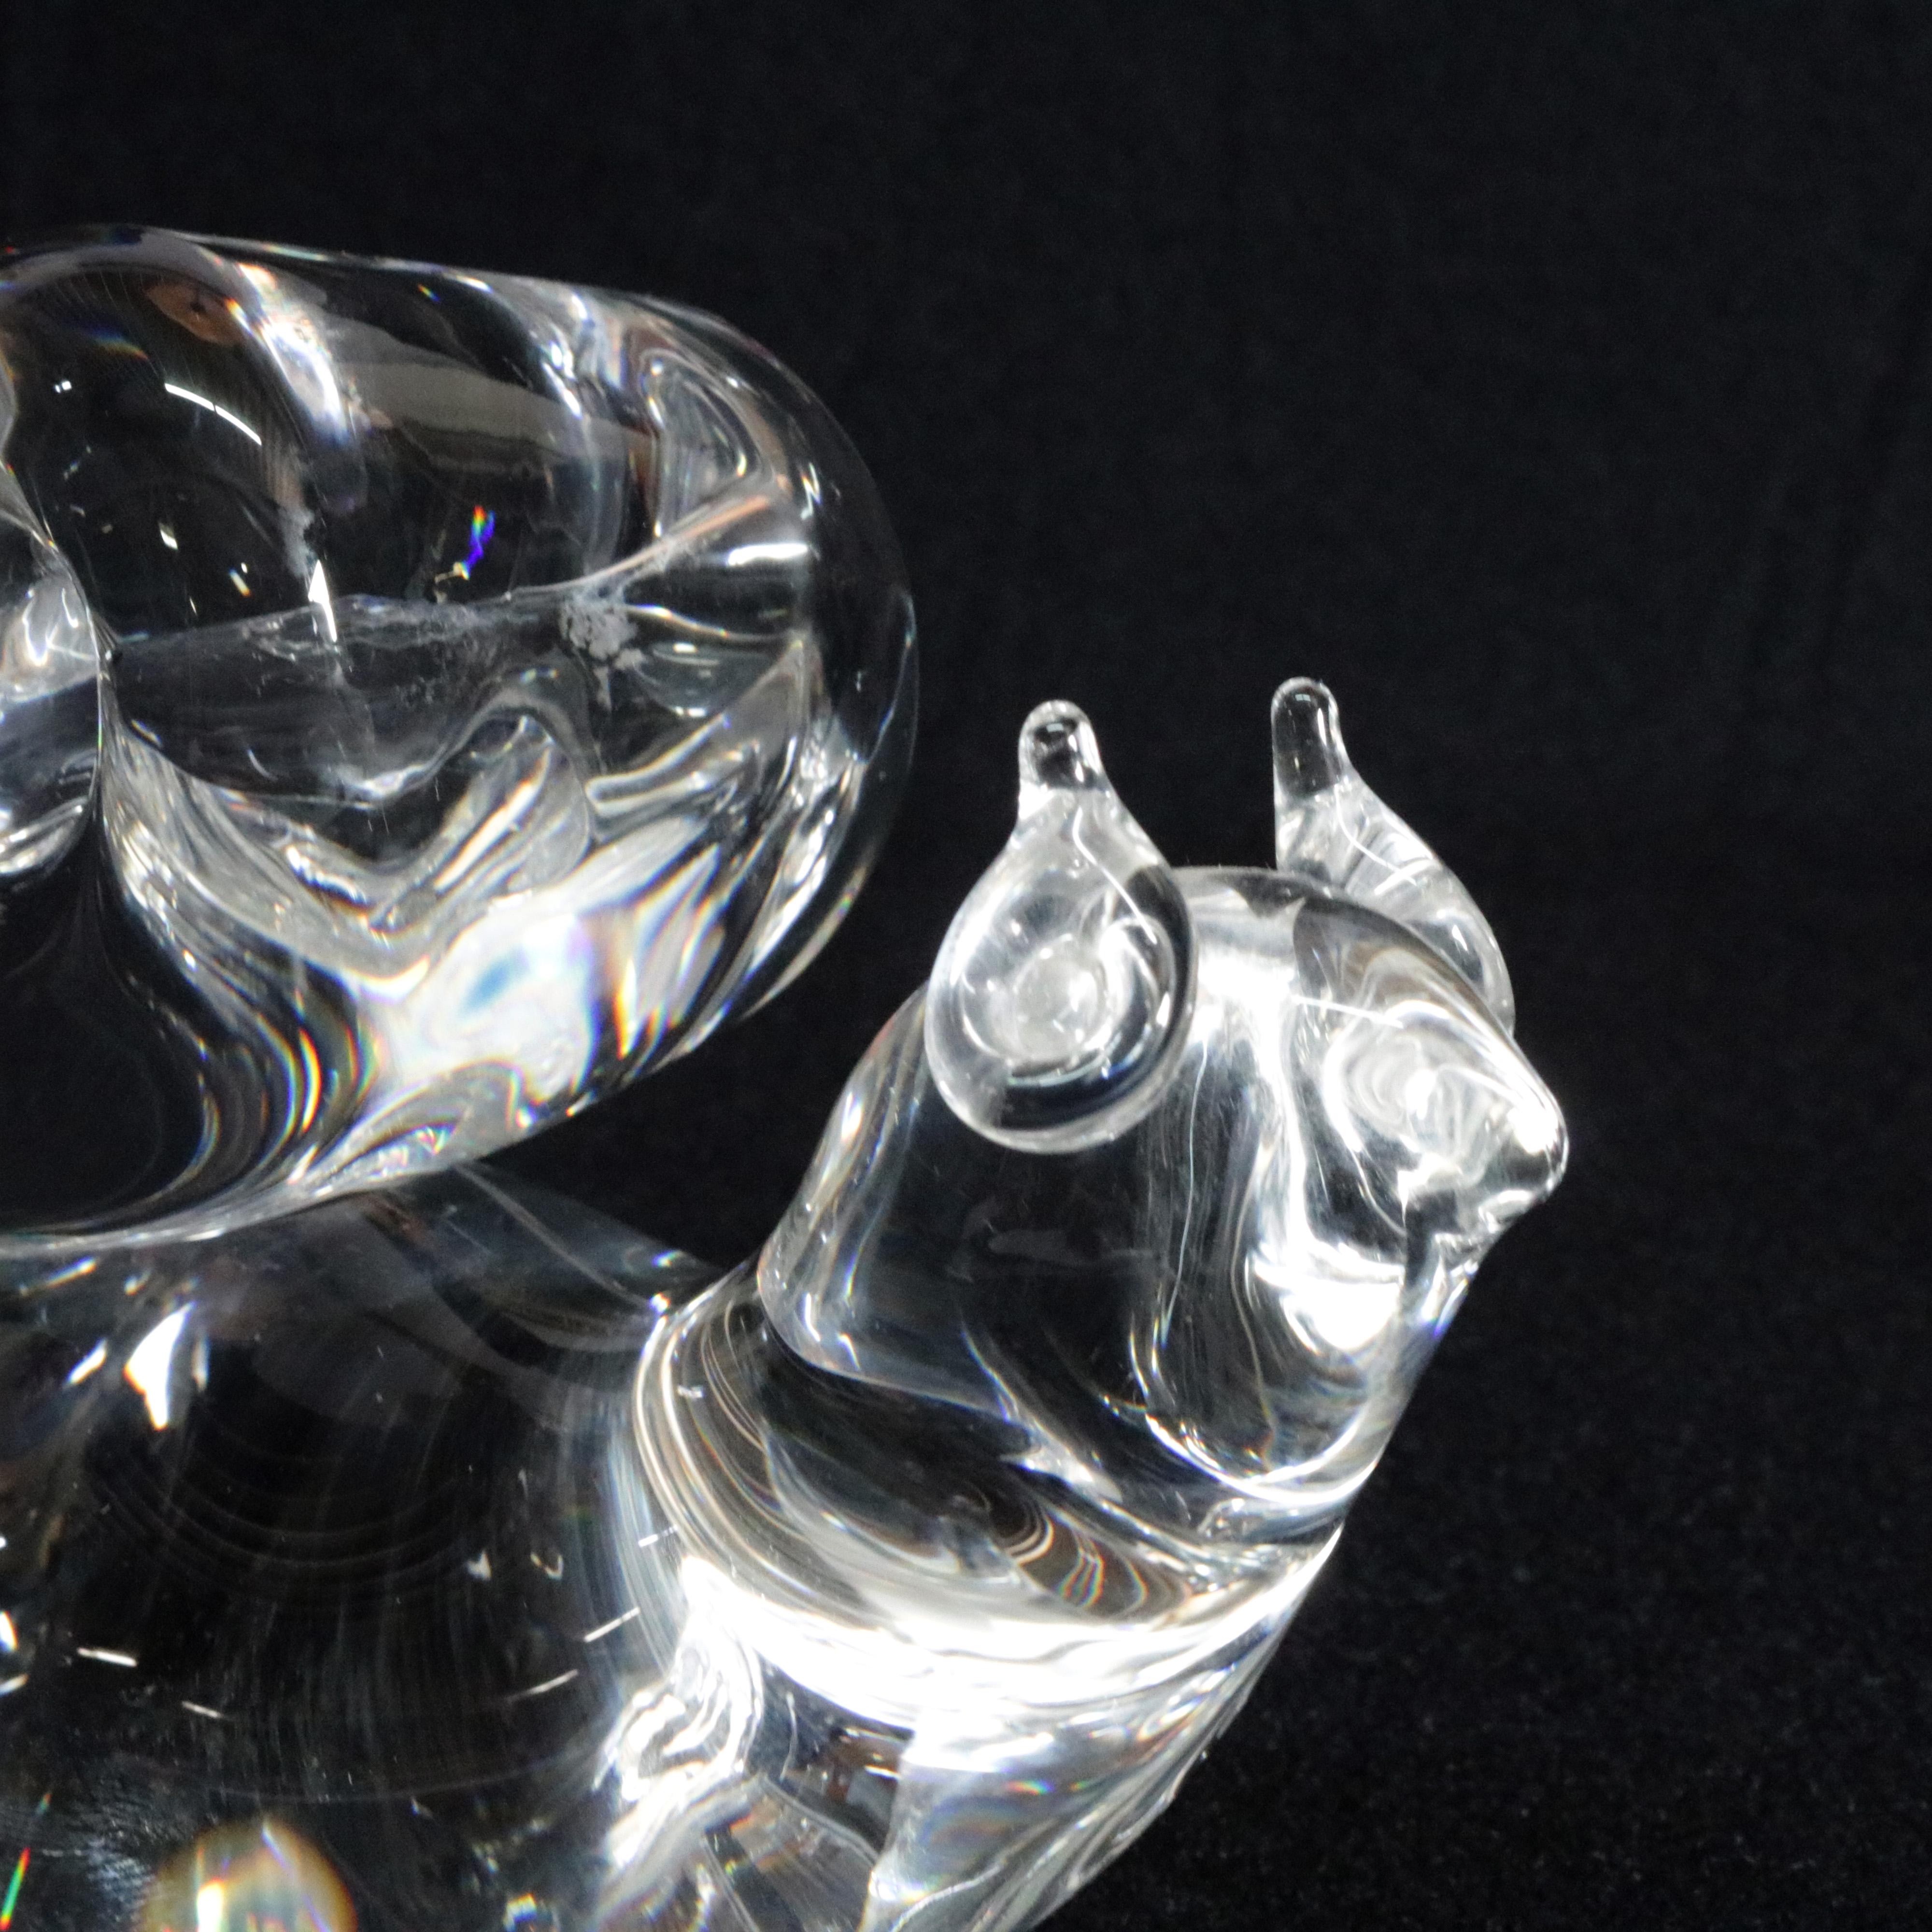 Steuben Crystal Sculpture Paperweight of Squirrel by Lloyd Atkins, Signed 2